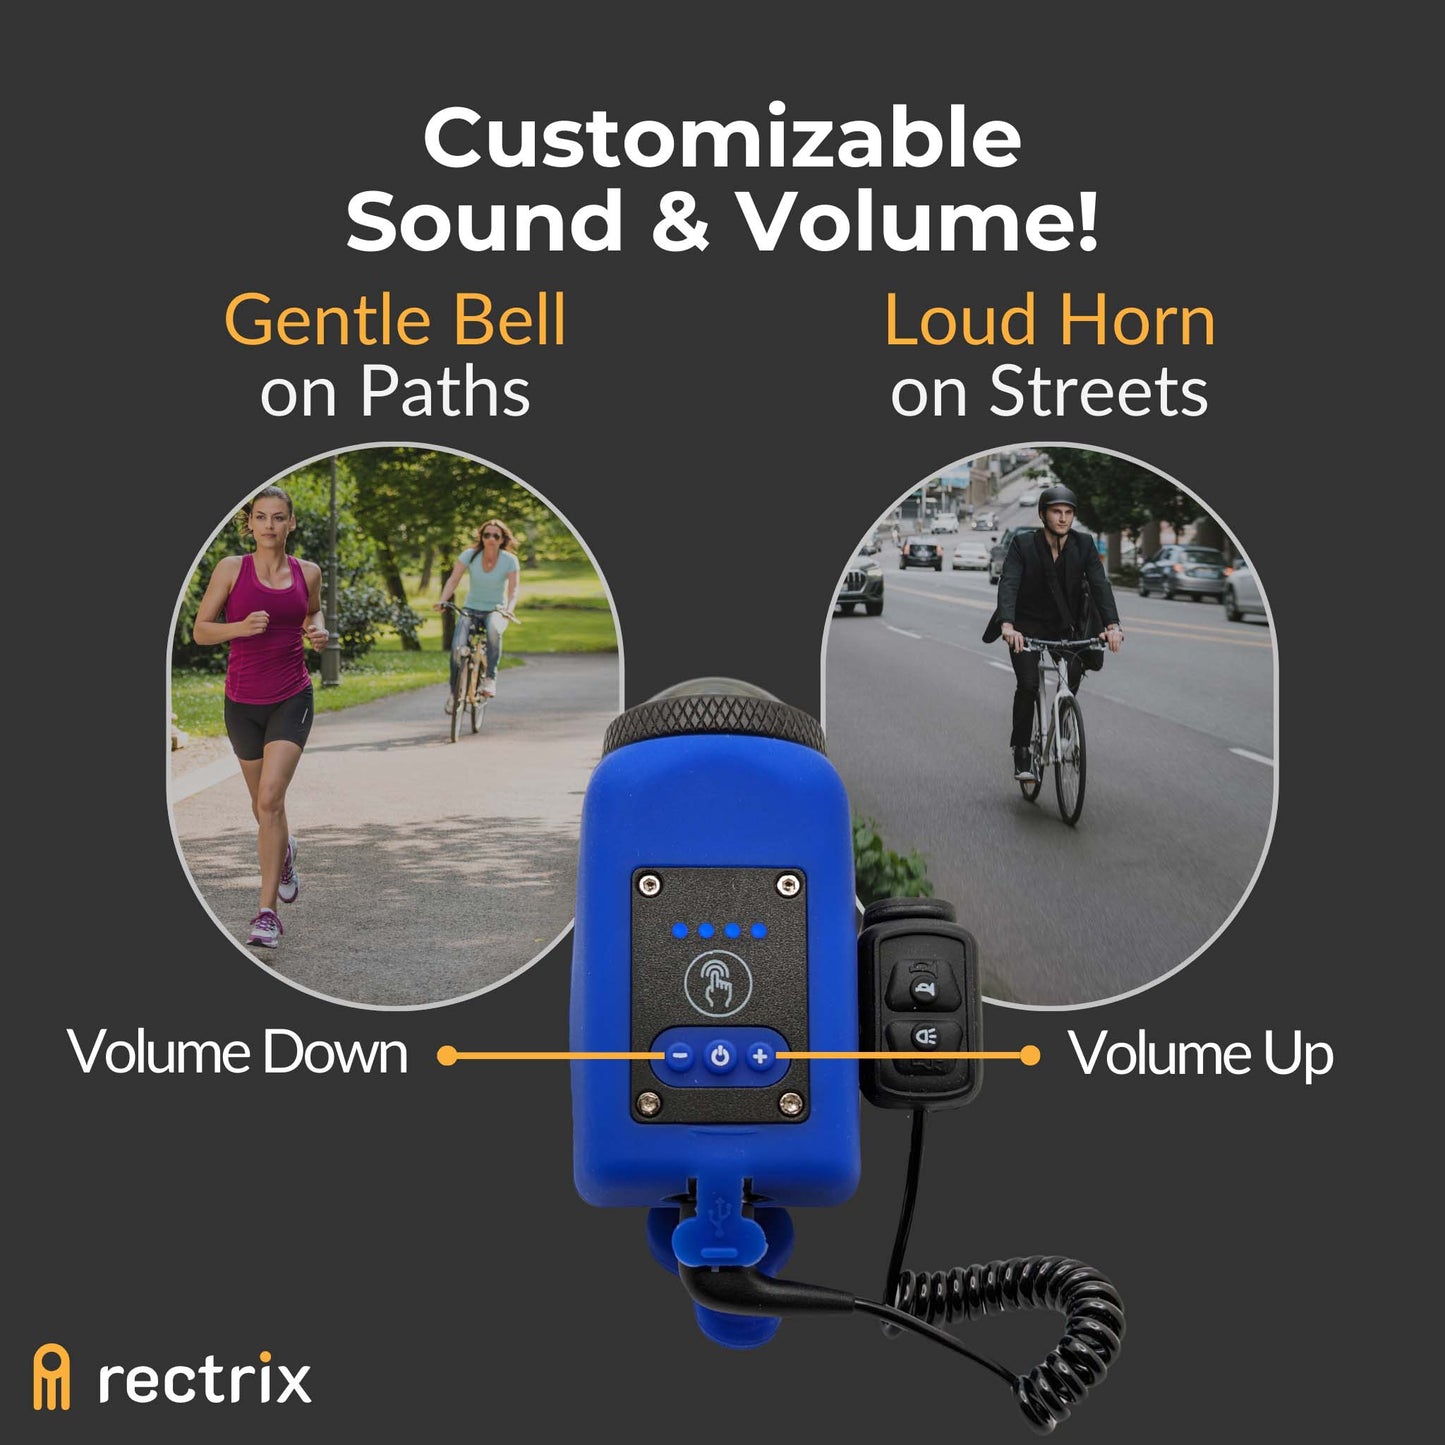 Showcasing the horn's adjustable volume for use on quiet bike paths or bustling streets